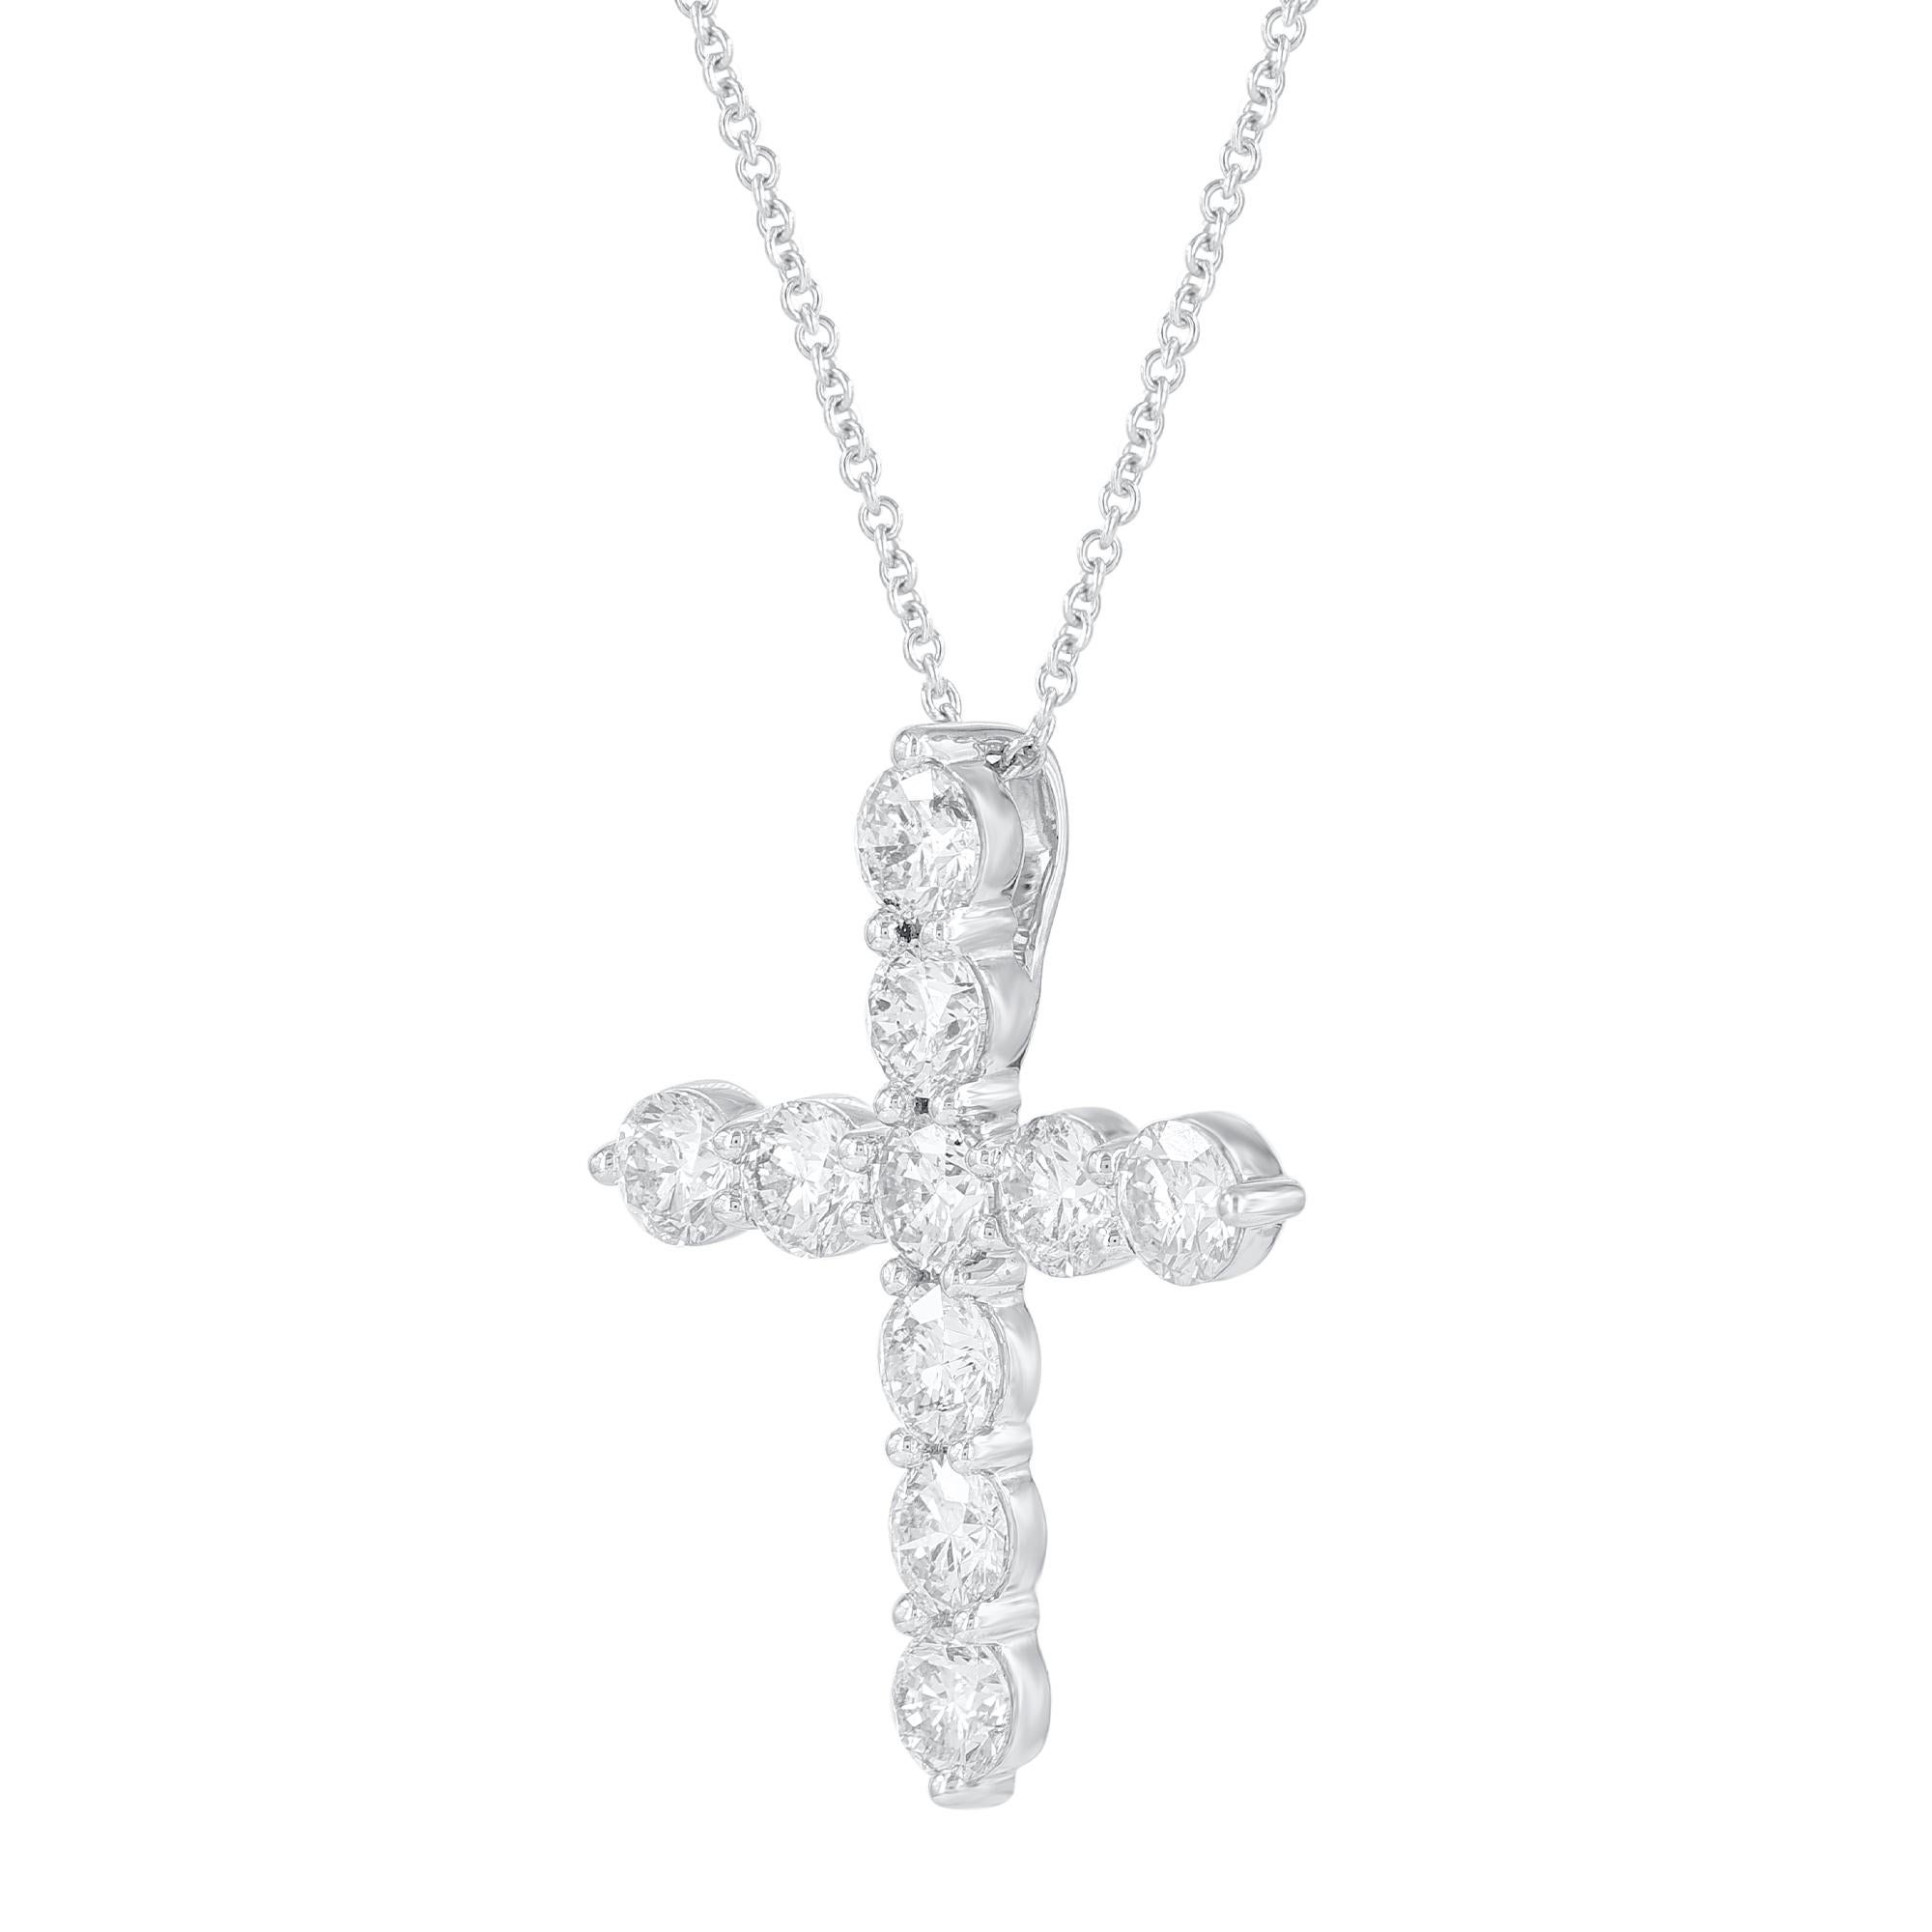 Bring charm to your look with this diamond cross pendant. The pendant is crafted from 18-karat white gold and features Round Brilliant 10 white diamonds in Prongset, G-H color SI1-2 clarity and a high polish finish complete the Brilliant